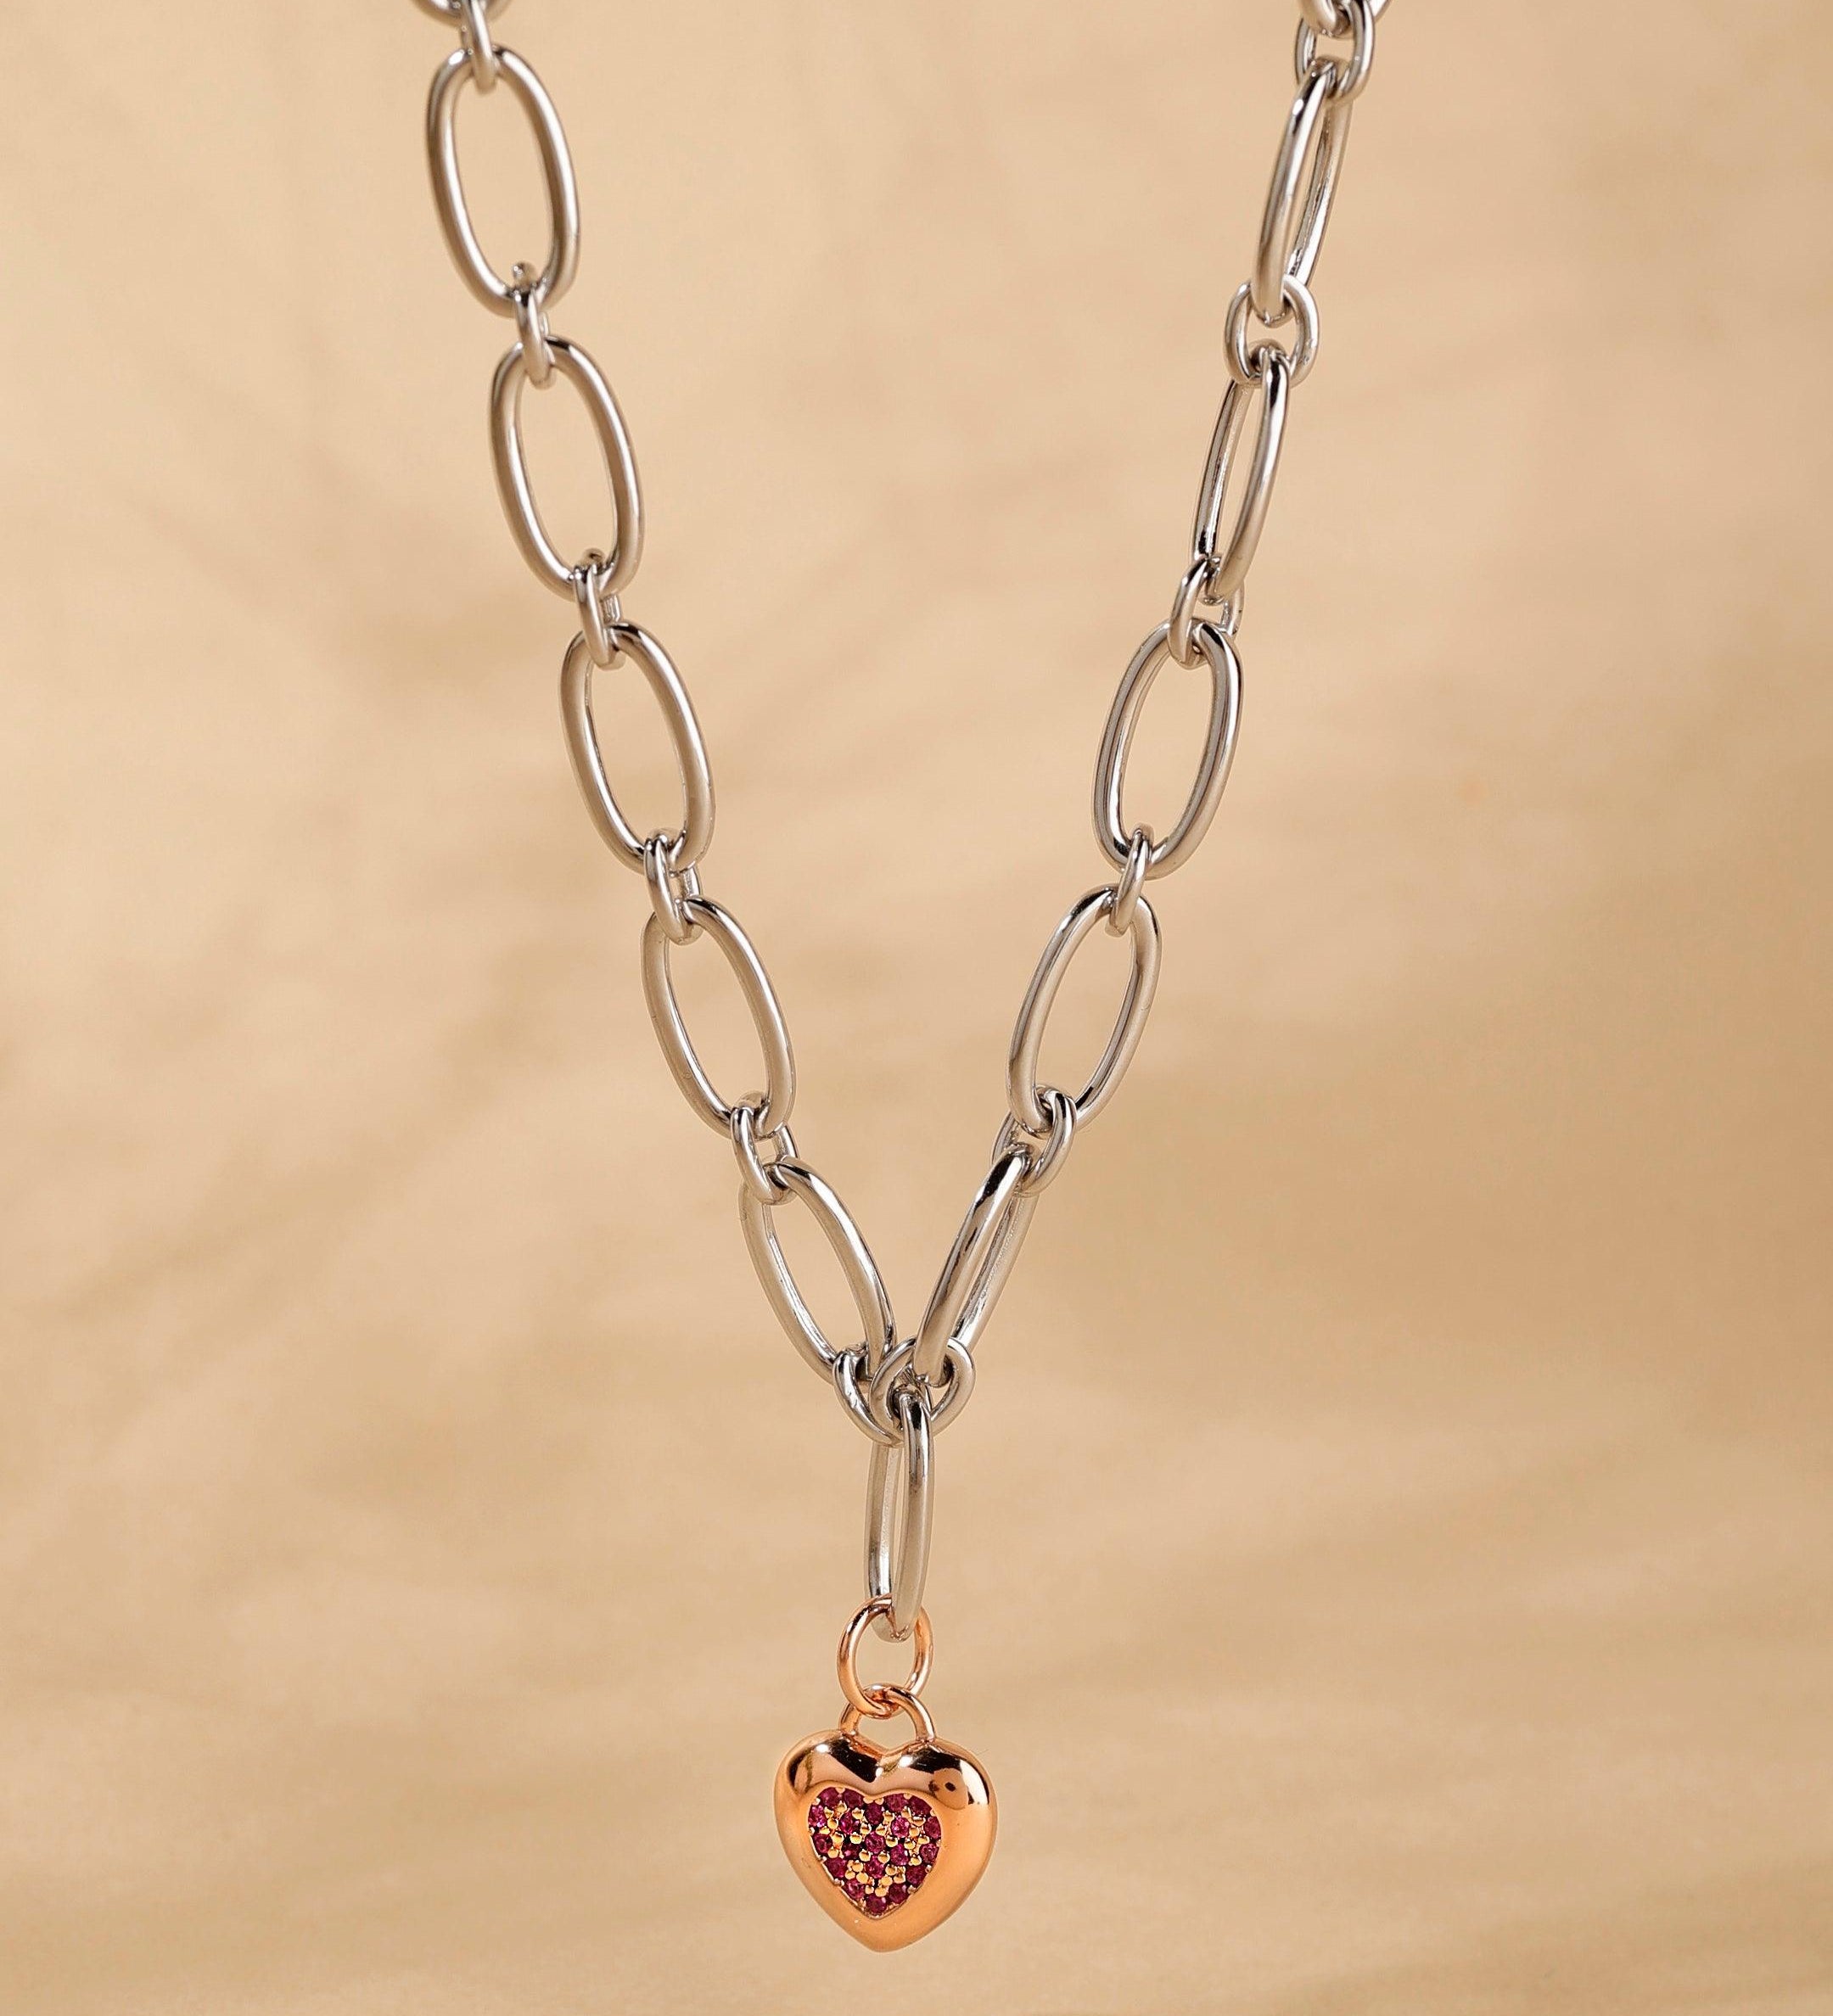 Joyful Bliss of Love Silver Necklace - Diavo Jewels